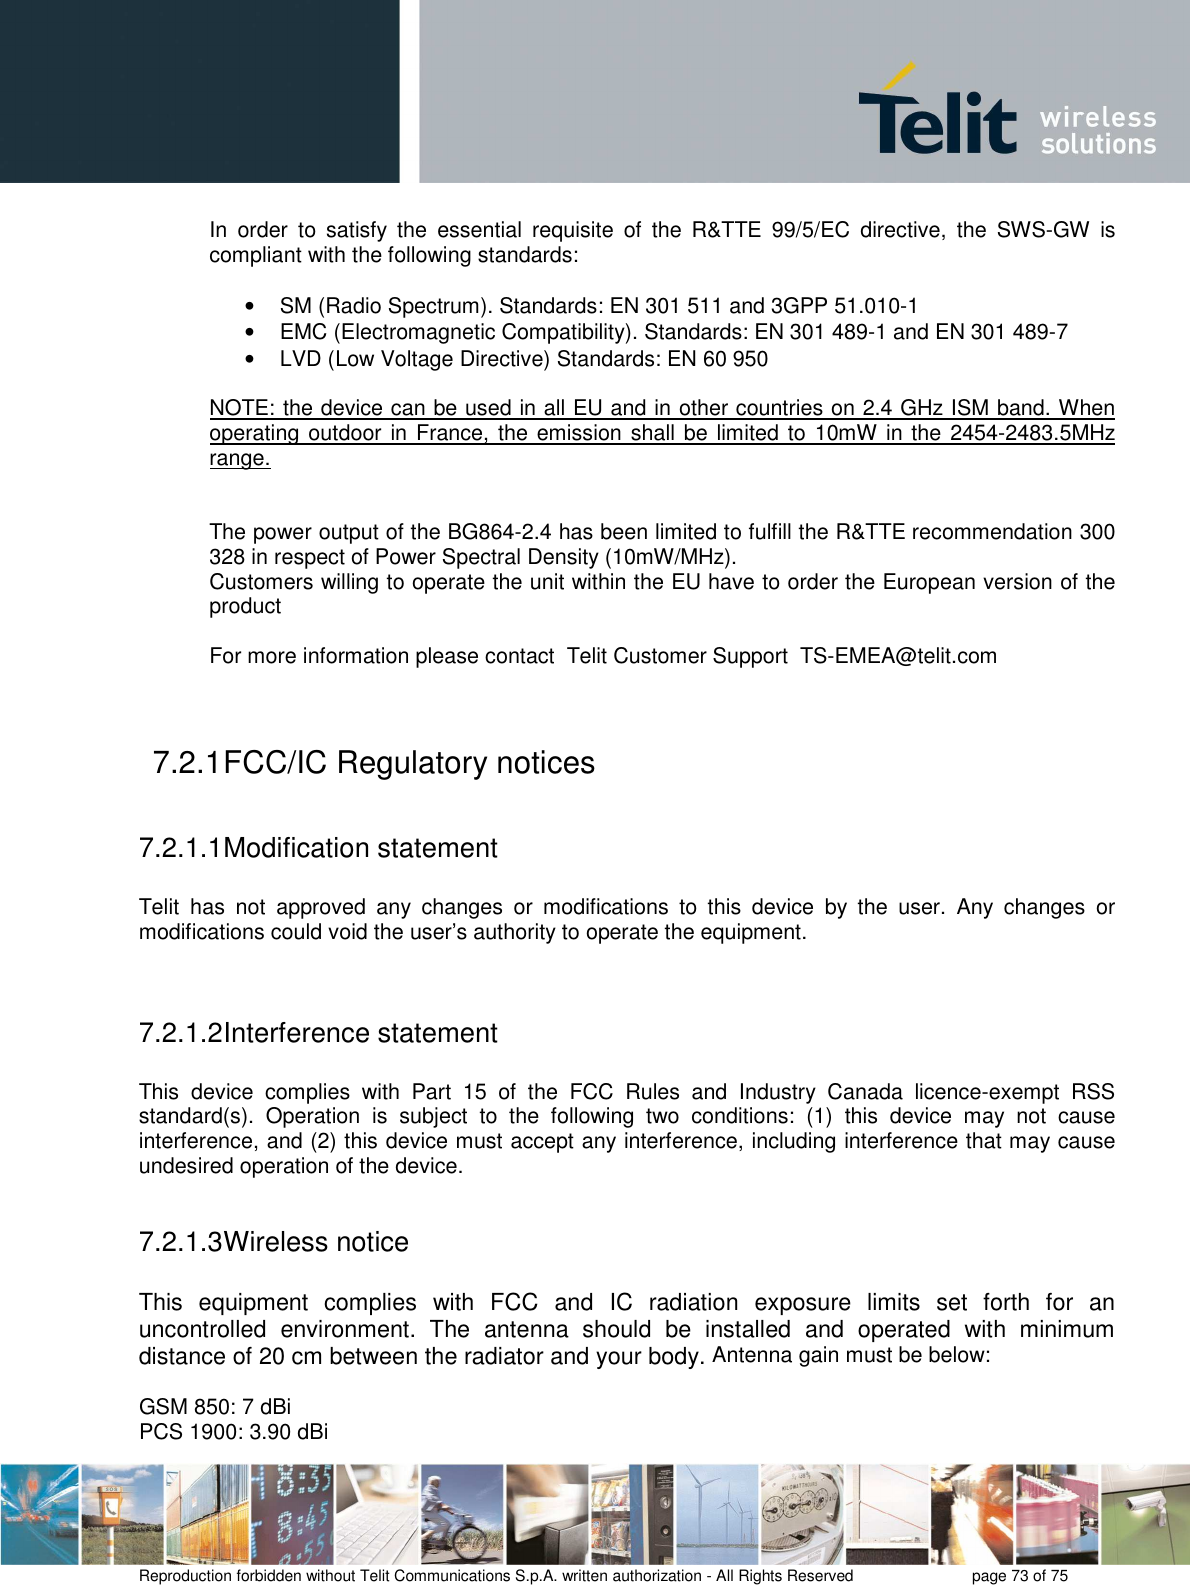       Reproduction forbidden without Telit Communications S.p.A. written authorization - All Rights Reserved    page 73 of 75  In  order  to  satisfy  the  essential  requisite  of  the  R&amp;TTE  99/5/EC  directive,  the  SWS-GW  is compliant with the following standards:  •  SM (Radio Spectrum). Standards: EN 301 511 and 3GPP 51.010-1 •  EMC (Electromagnetic Compatibility). Standards: EN 301 489-1 and EN 301 489-7 •  LVD (Low Voltage Directive) Standards: EN 60 950  NOTE: the device can be used in all EU and in other countries on 2.4 GHz ISM band. When operating outdoor in France, the emission shall be limited to  10mW in the 2454-2483.5MHz range.   The power output of the BG864-2.4 has been limited to fulfill the R&amp;TTE recommendation 300 328 in respect of Power Spectral Density (10mW/MHz).  Customers willing to operate the unit within the EU have to order the European version of the product    For more information please contact  Telit Customer Support  TS-EMEA@telit.com  7.2.1 FCC/IC Regulatory notices  7.2.1.1 Modification statement  Telit  has  not  approved  any  changes  or  modifications  to  this  device  by  the  user.  Any  changes  or modifications could void the user’s authority to operate the equipment.   7.2.1.2 Interference statement  This  device  complies  with  Part  15  of  the  FCC  Rules  and  Industry  Canada  licence-exempt  RSS standard(s).  Operation  is  subject  to  the  following  two  conditions:  (1)  this  device  may  not  cause interference, and (2) this device must accept any interference, including interference that may cause undesired operation of the device.  7.2.1.3 Wireless notice  This  equipment  complies  with  FCC  and  IC  radiation  exposure  limits  set  forth  for  an uncontrolled  environment.  The  antenna  should  be  installed  and  operated  with  minimum distance of 20 cm between the radiator and your body. Antenna gain must be below:  GSM 850: 7 dBi PCS 1900: 3.90 dBi 